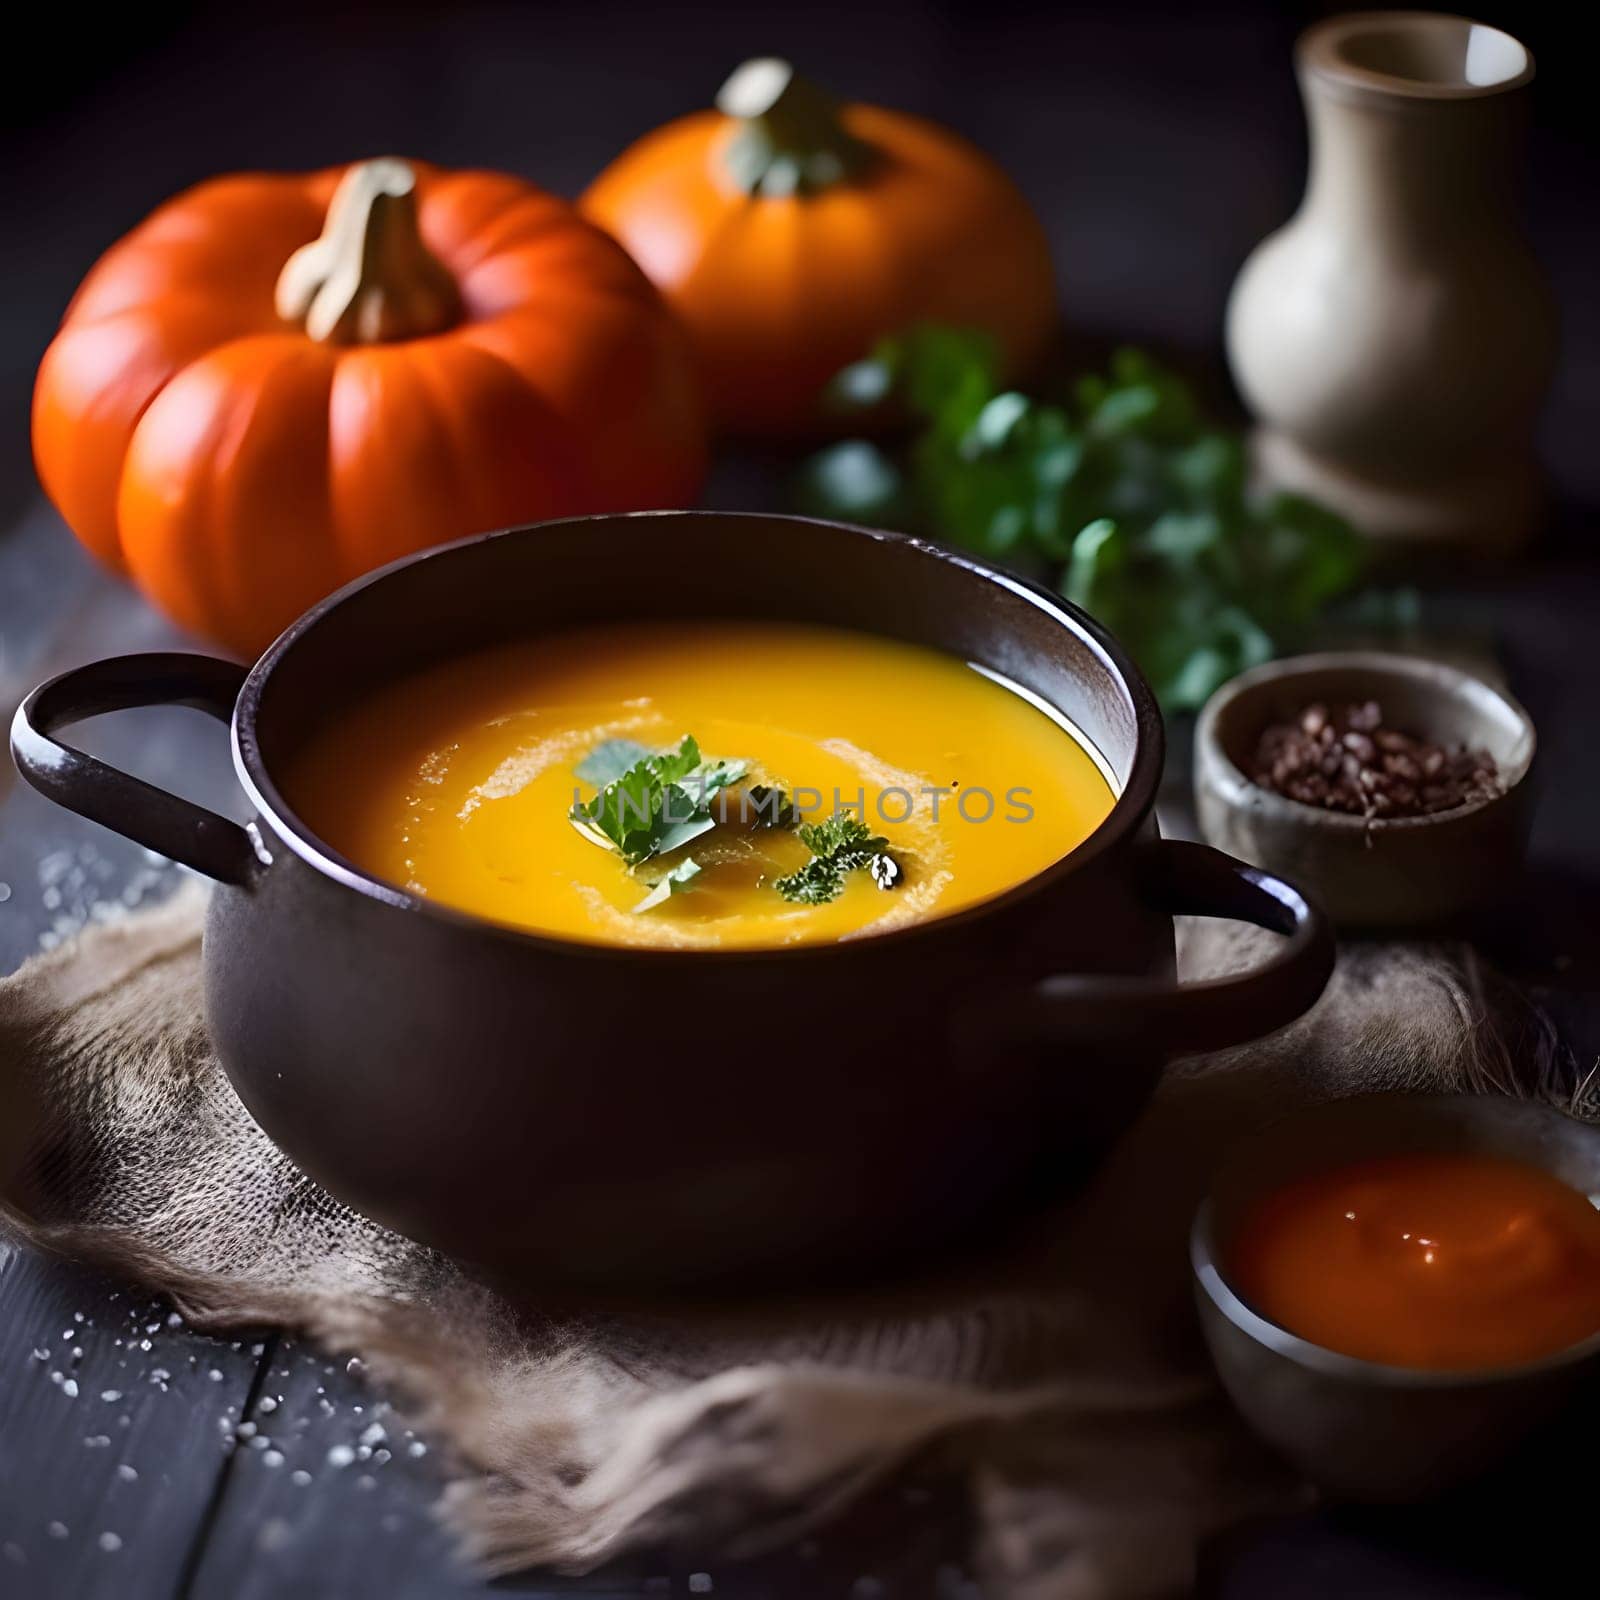 Pumpkin soup with parsley in a small black pot around pumpkins and spices. Pumpkin as a dish of thanksgiving for the harvest. by ThemesS